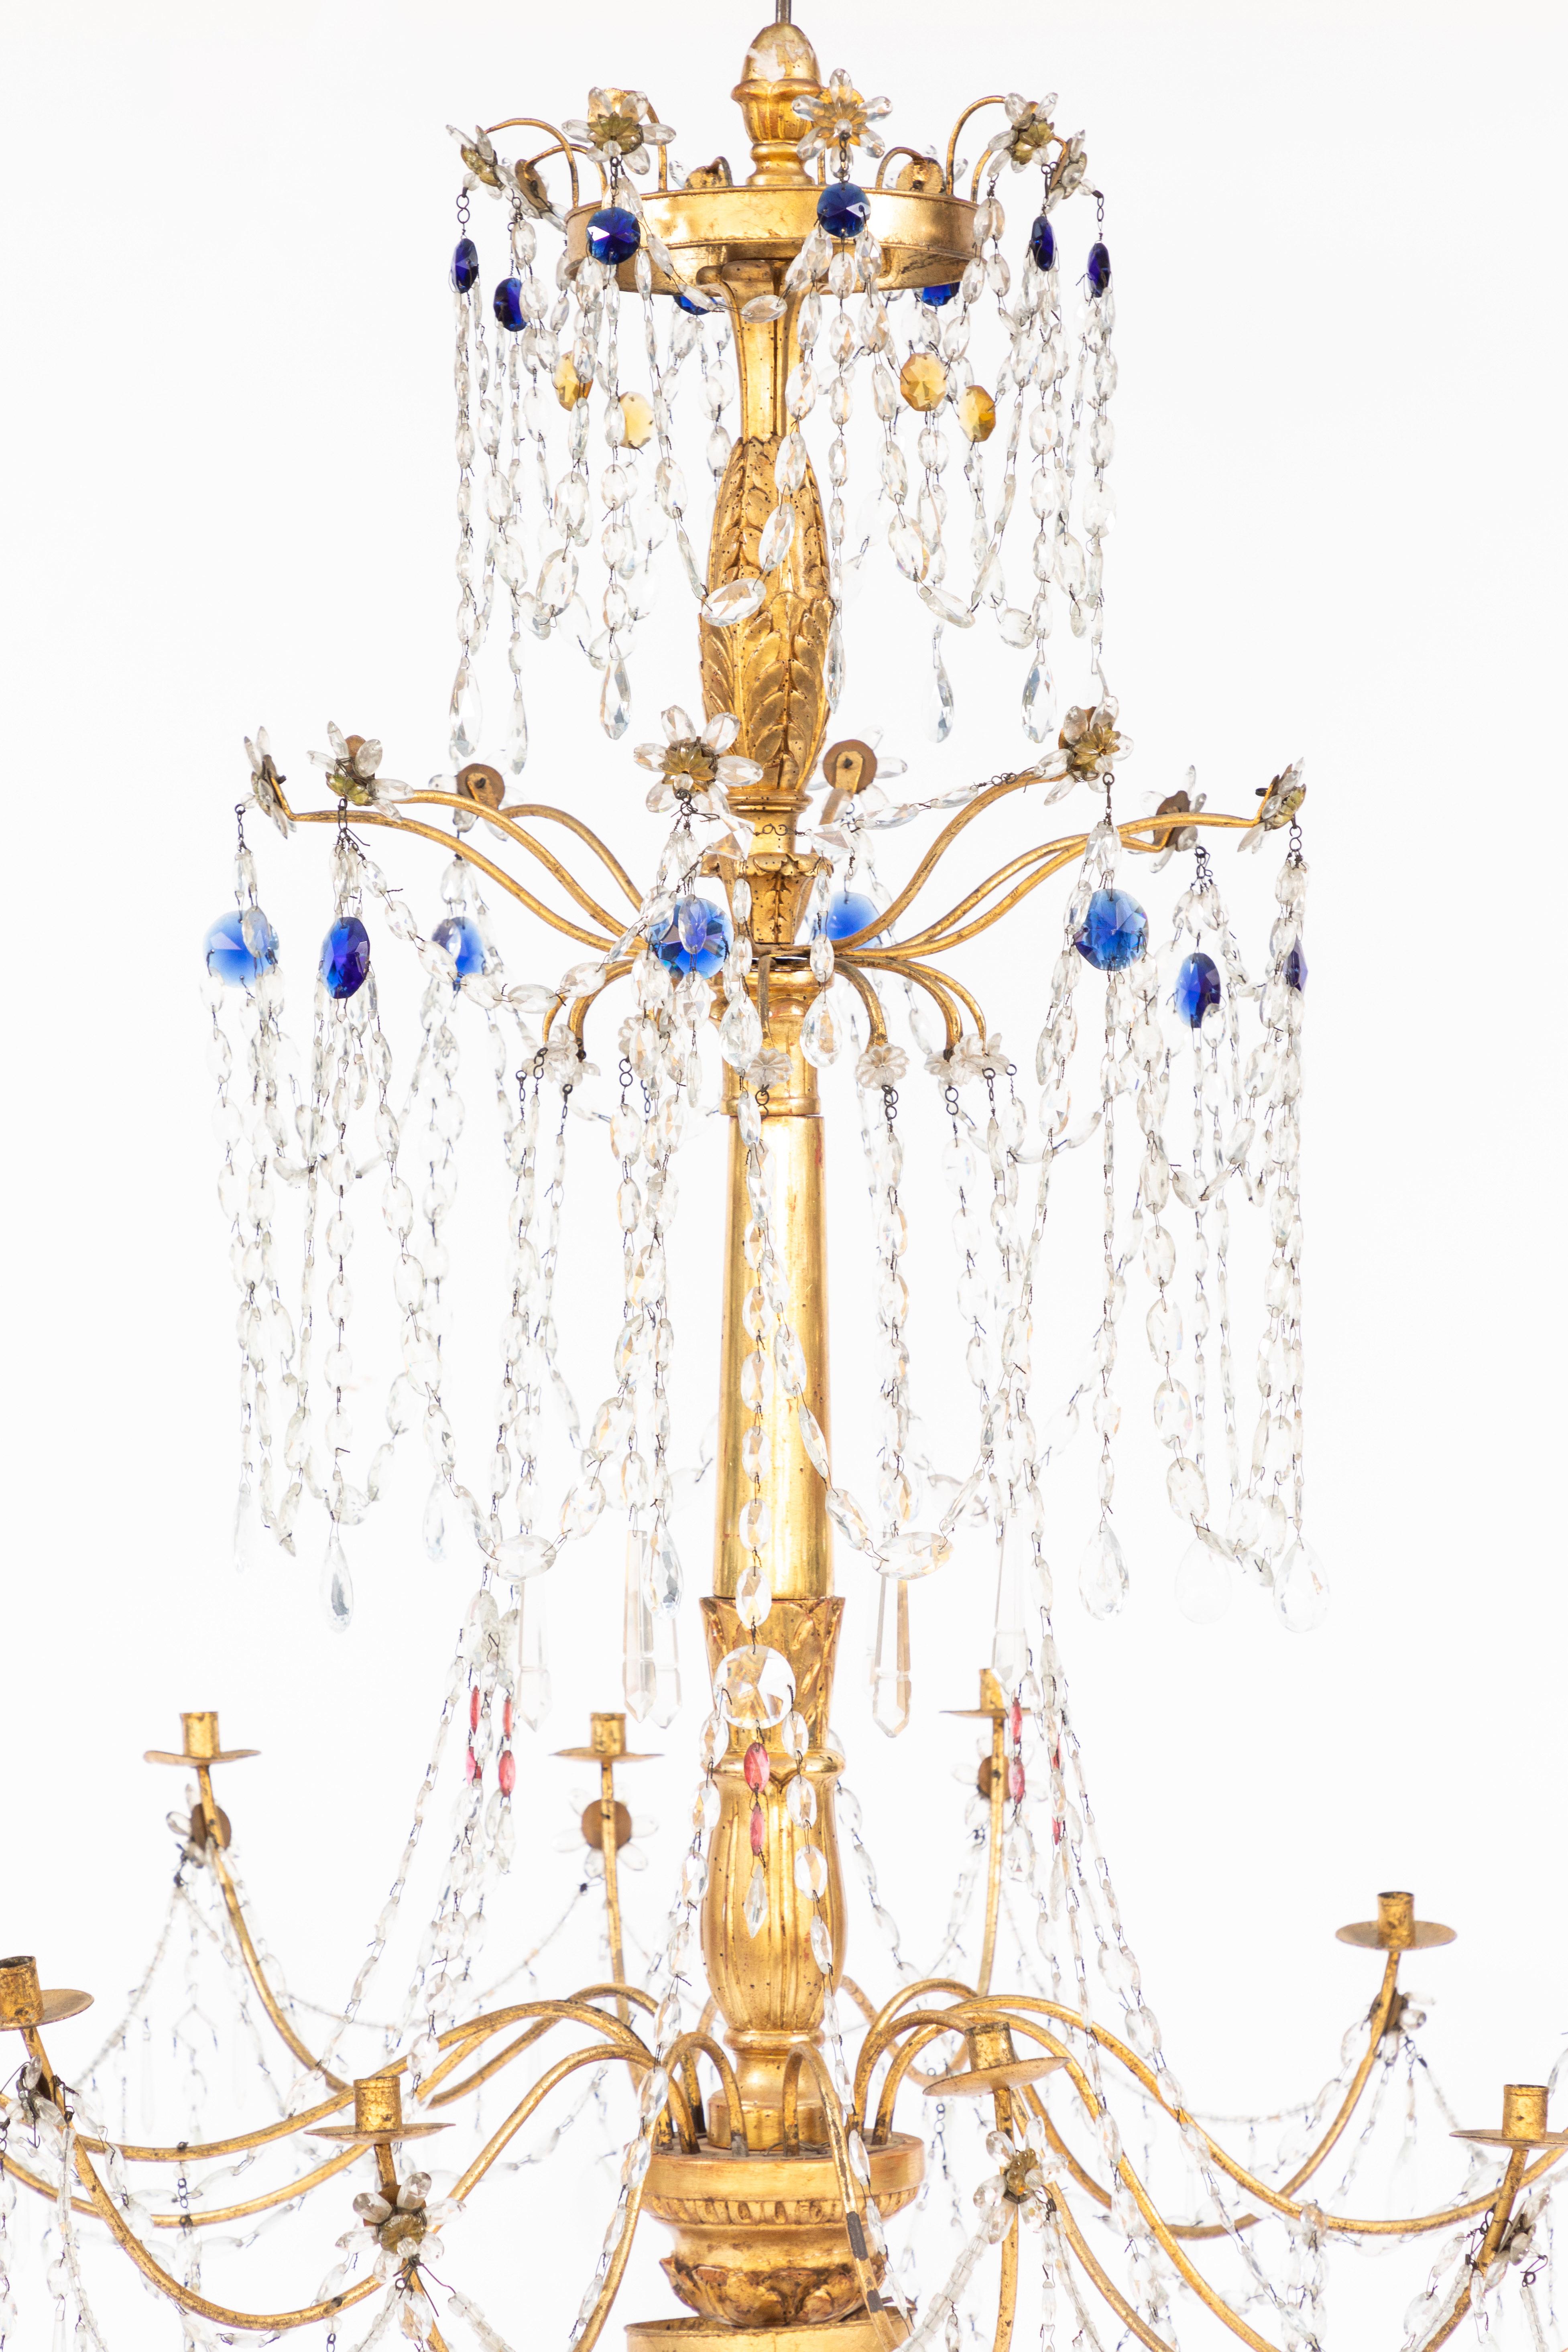 Pair of 18th century Italian giltwood and gilded iron chandeliers with sapphire and ruby colored crystals. All hand knotted. They are candle chandeliers but can be electrified.